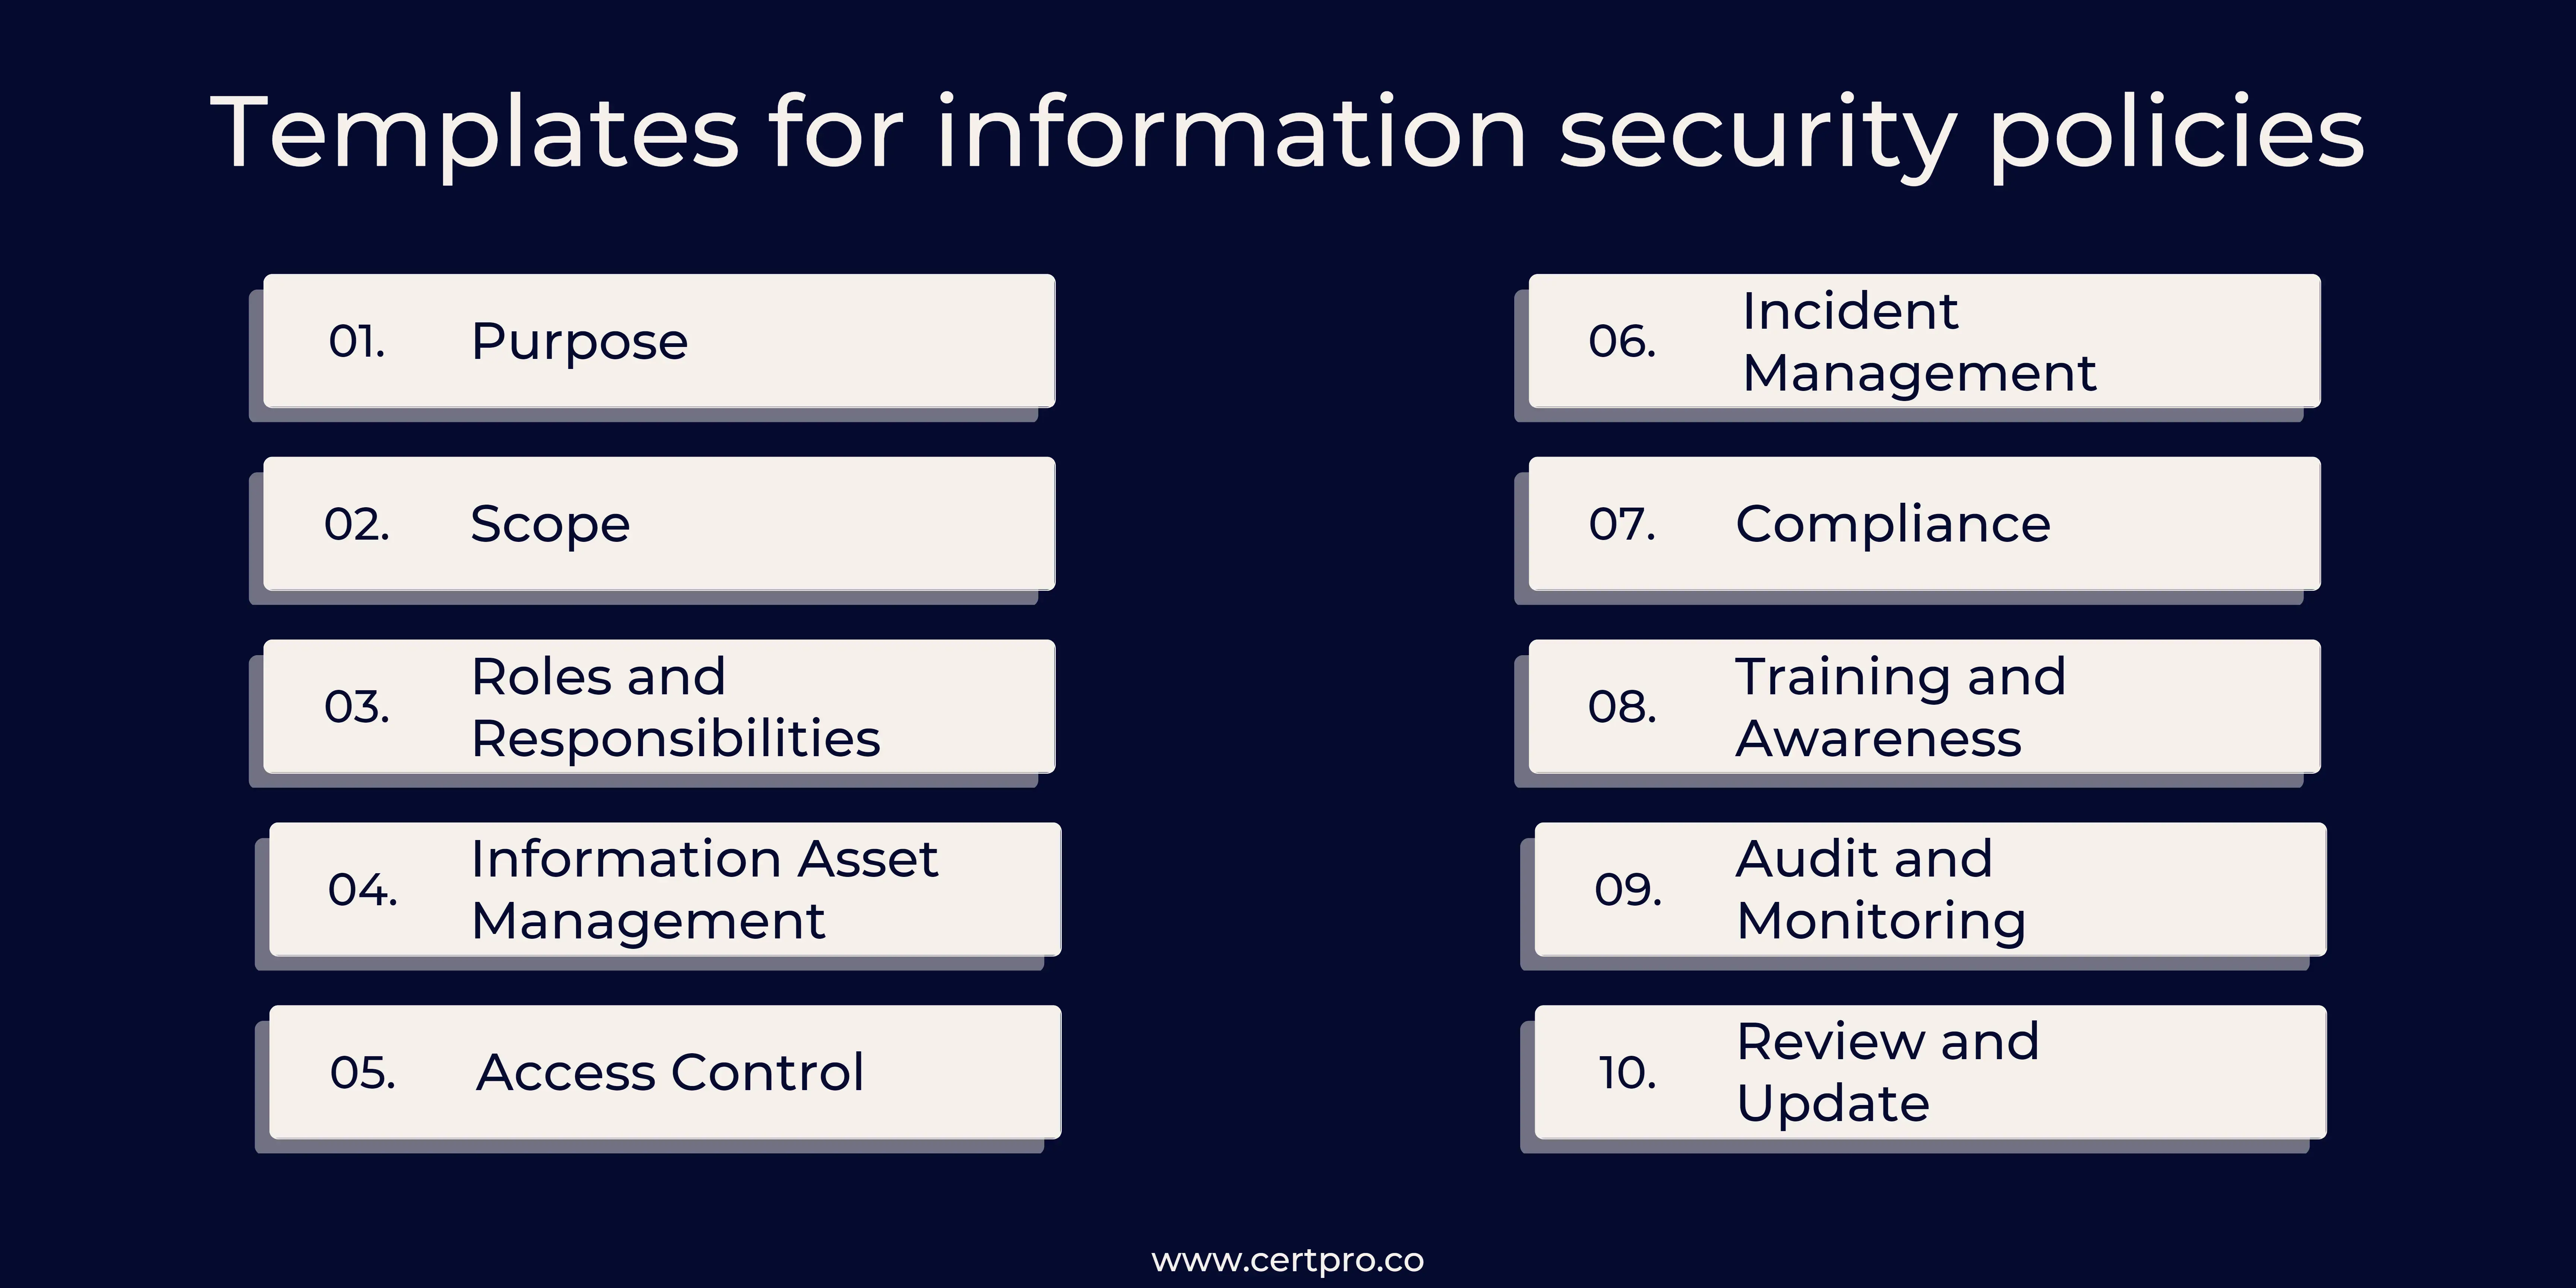 Templates for information security policies